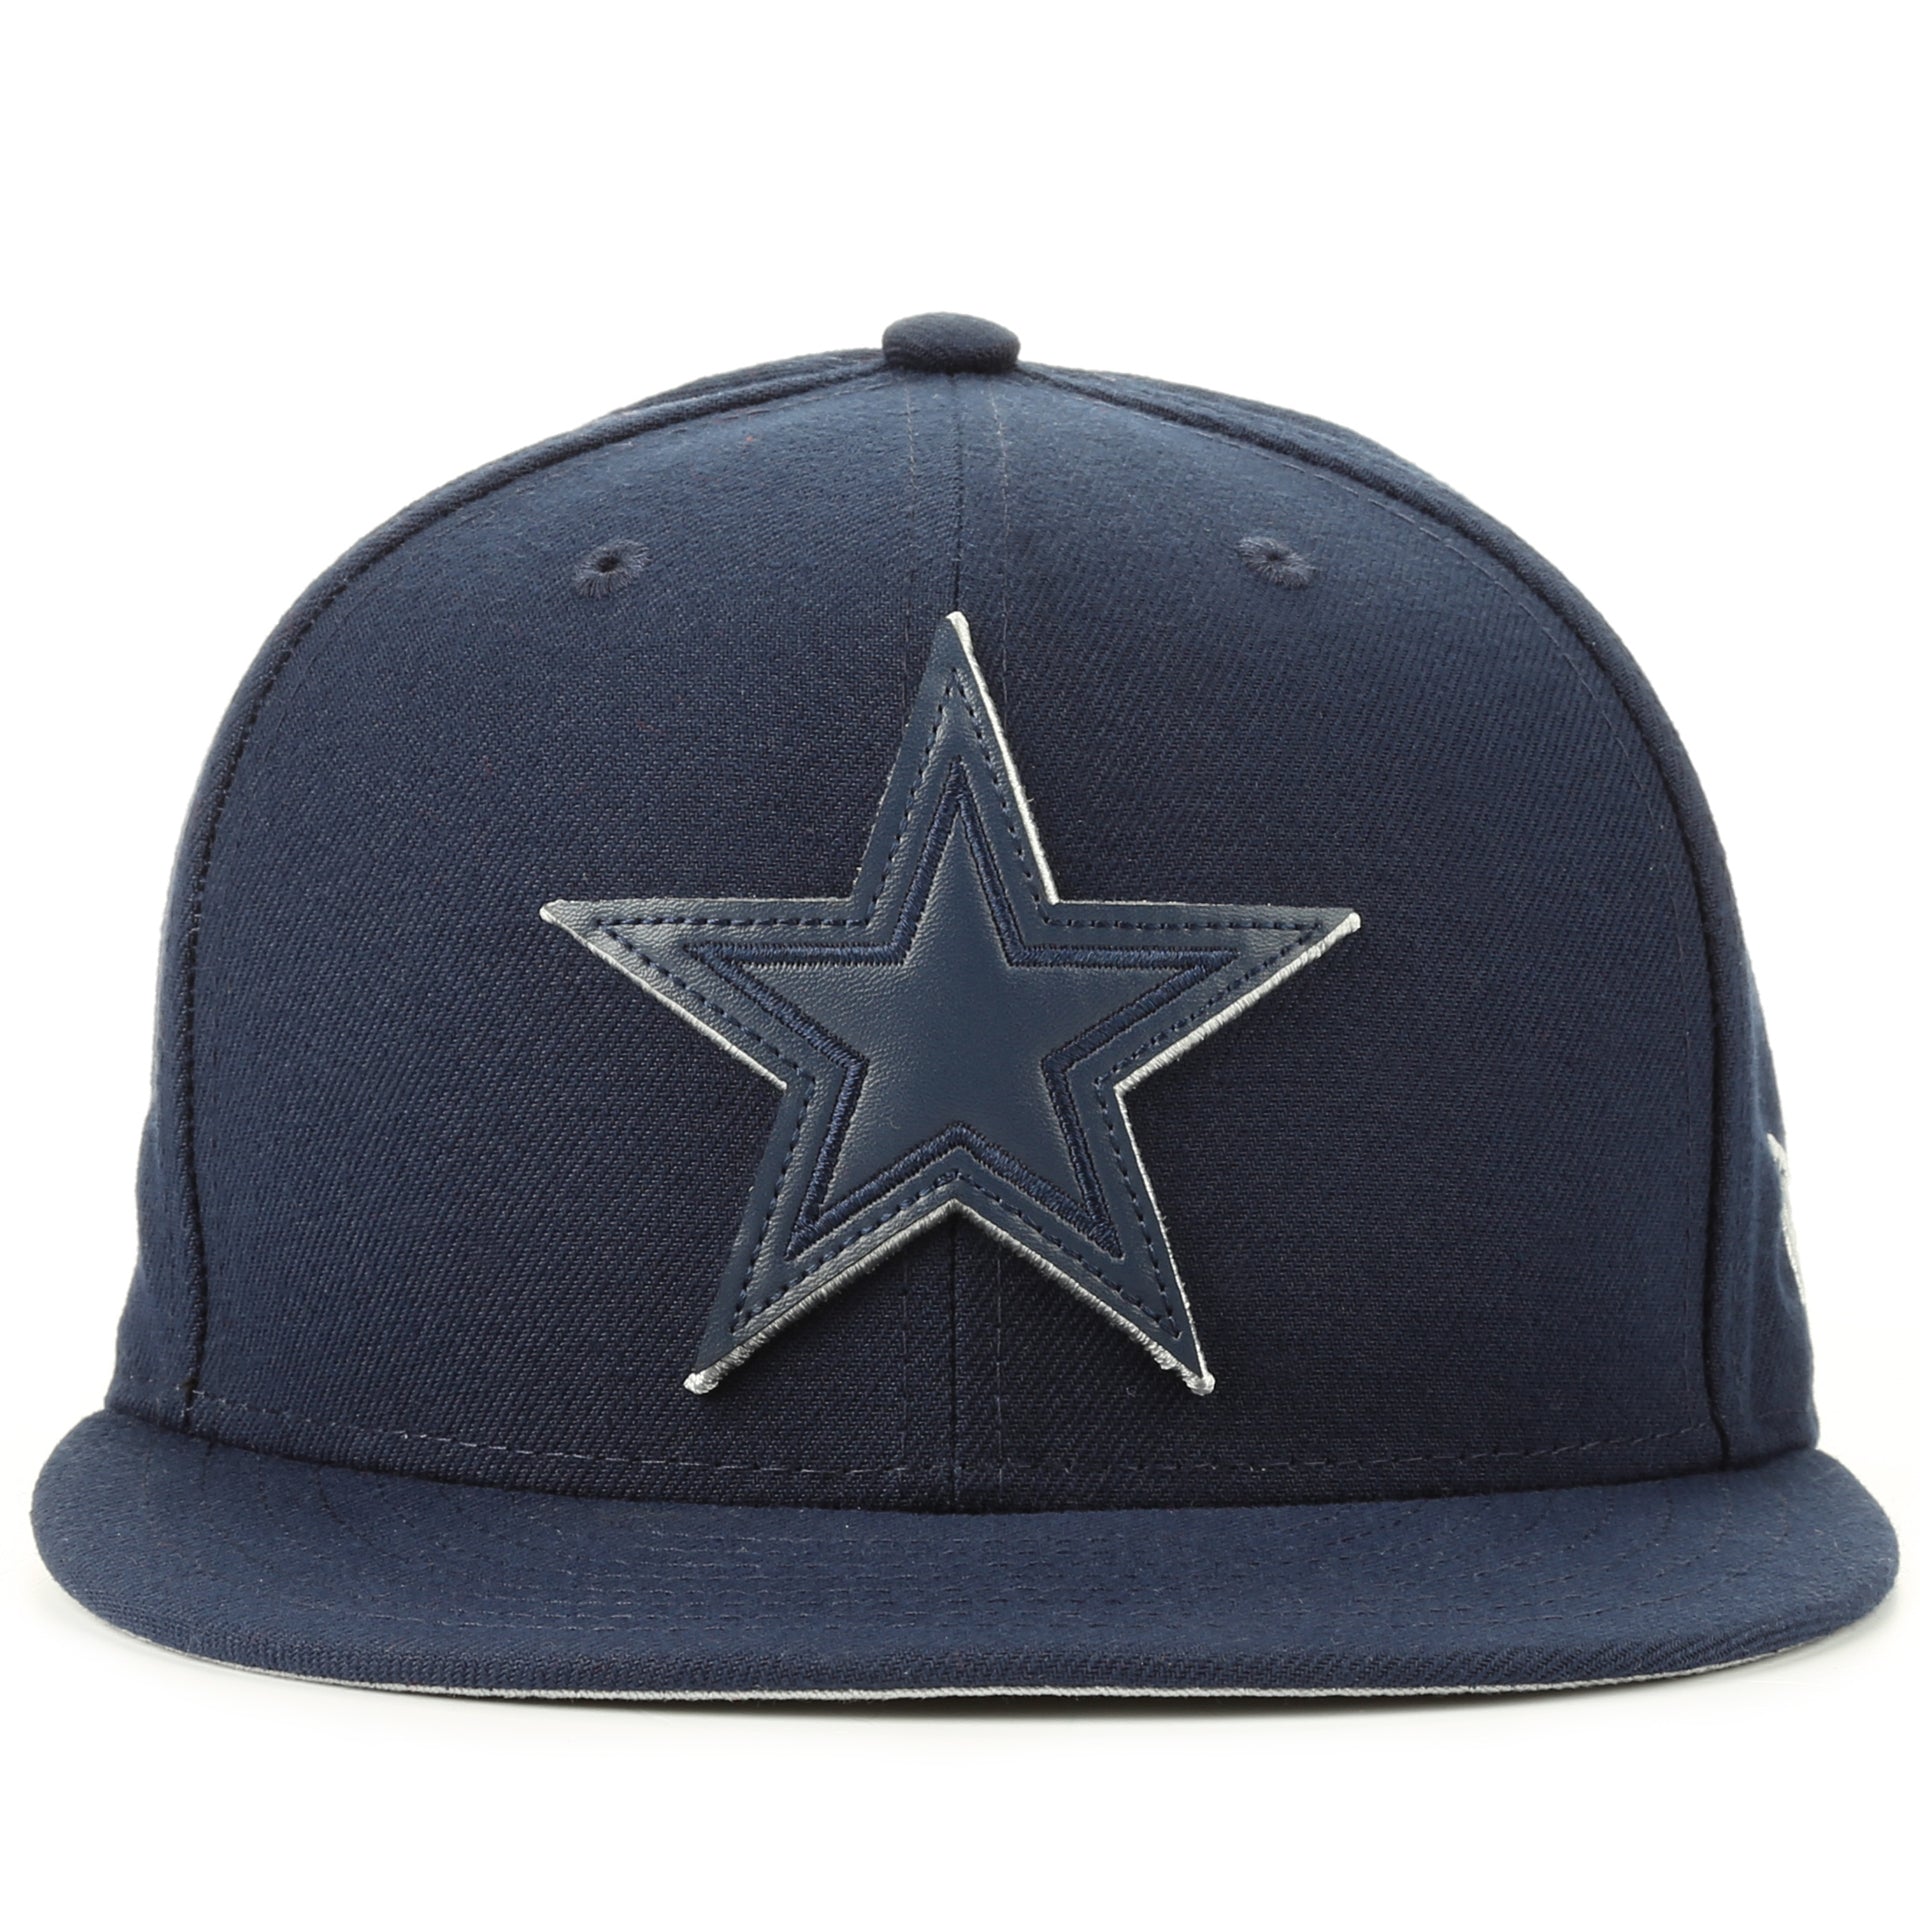 New Era 59Fifty Leather Pop Fitted Cap - Dallas Cowboys/Navy - New Star